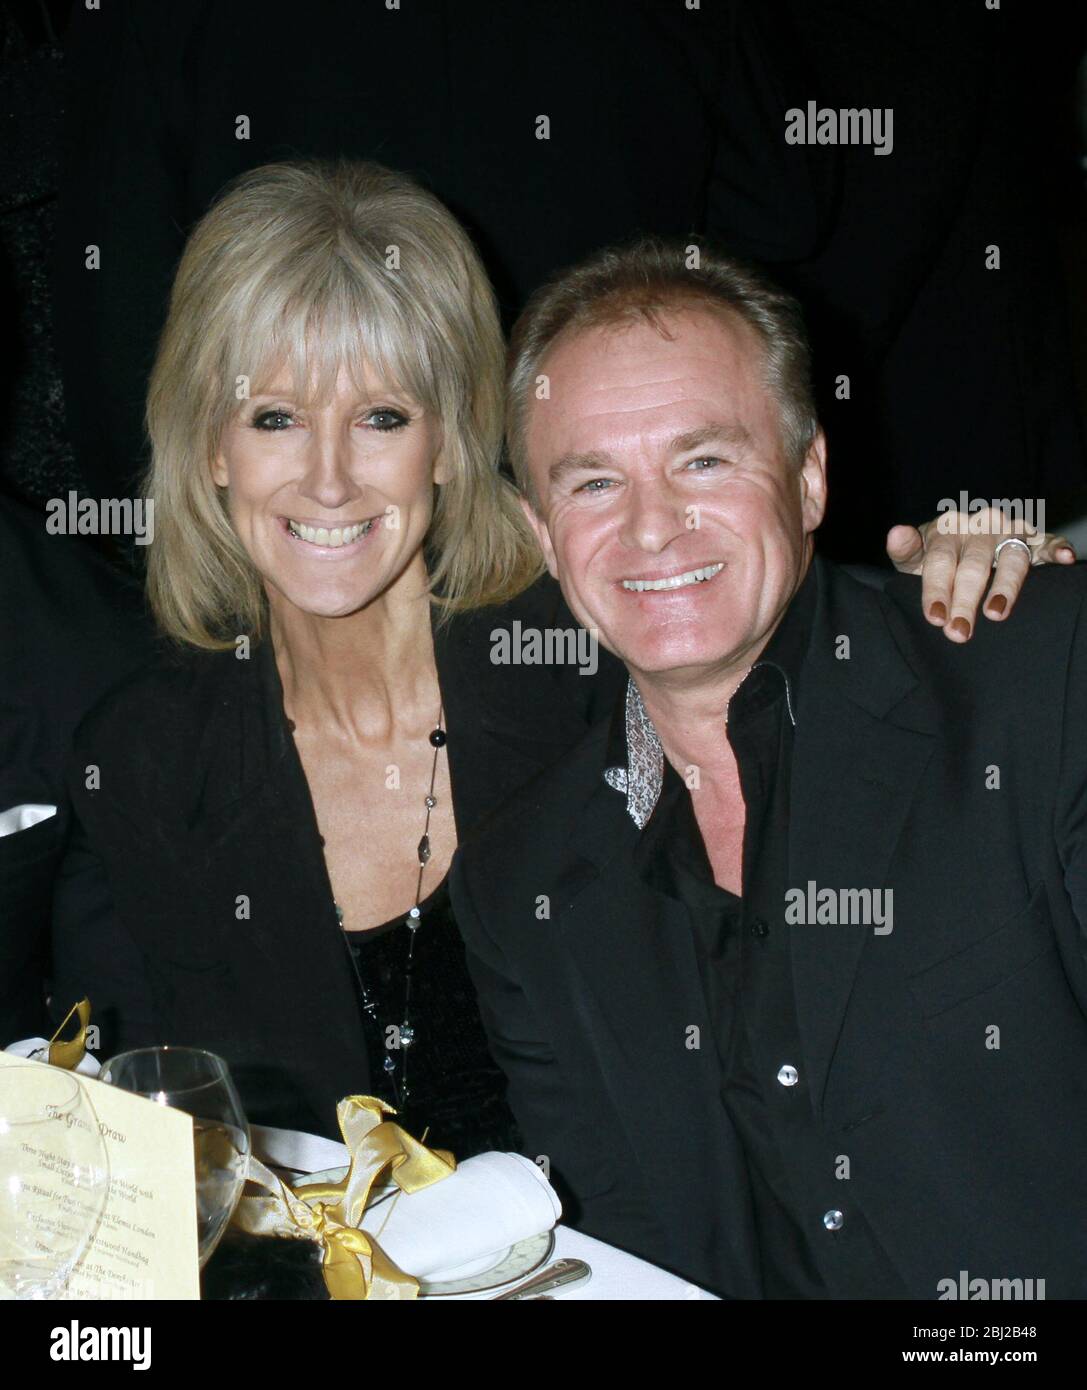 Television comedian Bobby Davro and girlfriend Vicky Wright at an event in the Dorchester Hotel, London, England 2012. Stock Photo